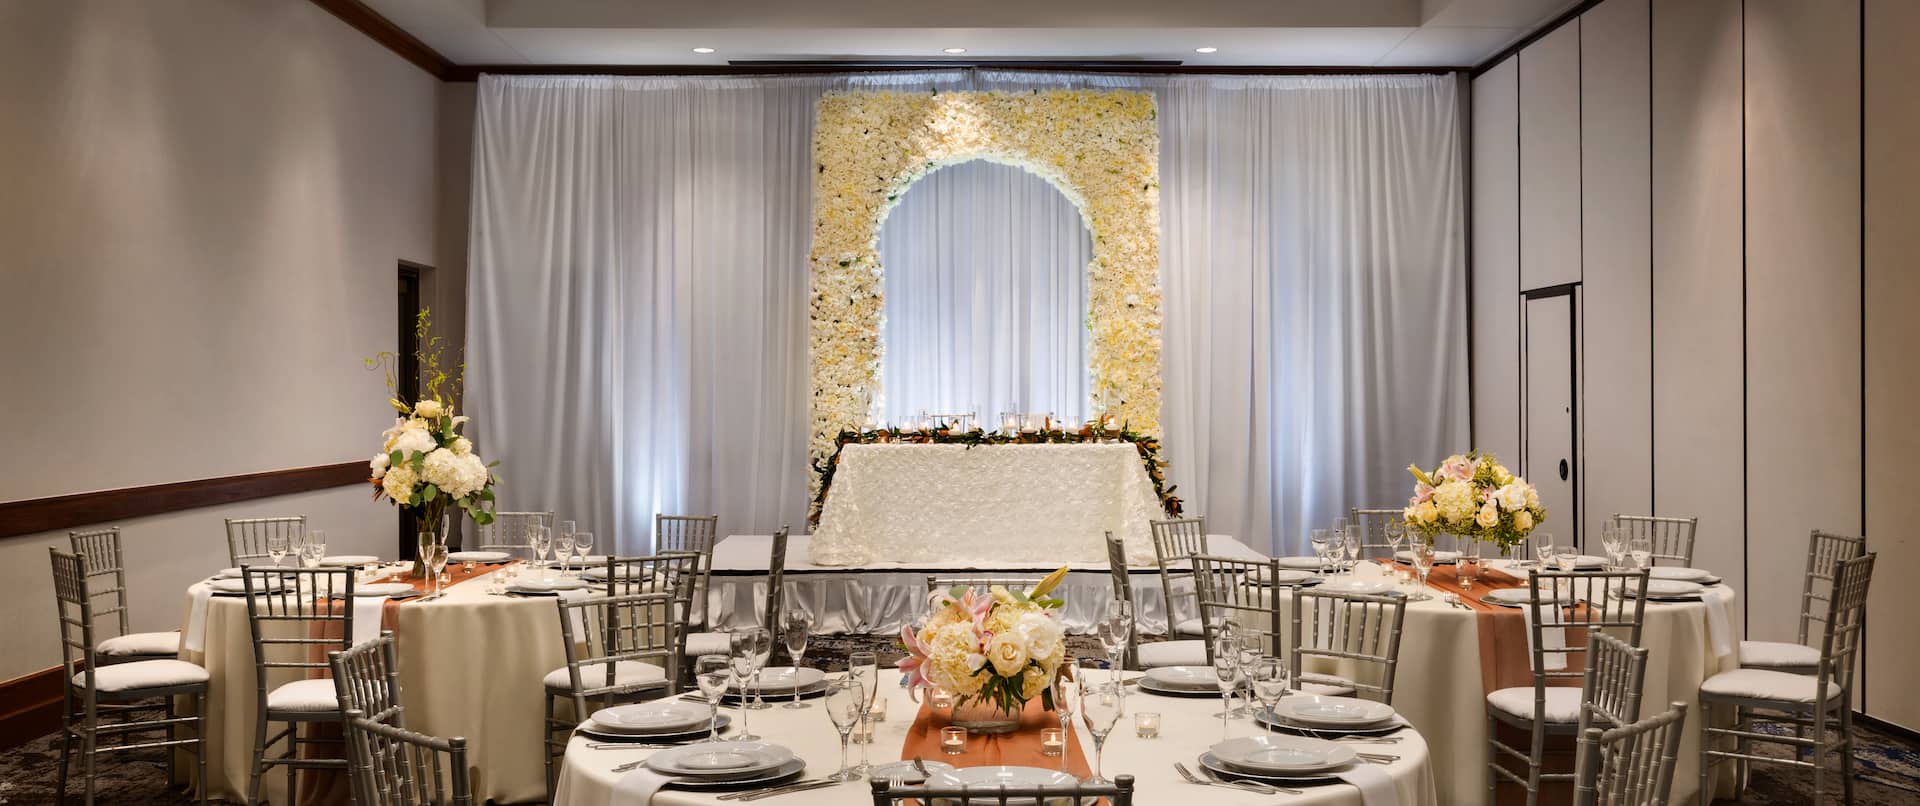 Embassy Suites Dallas - DFW Airport North Outdoor World Hotel, TX - Cross Timbers Wedding